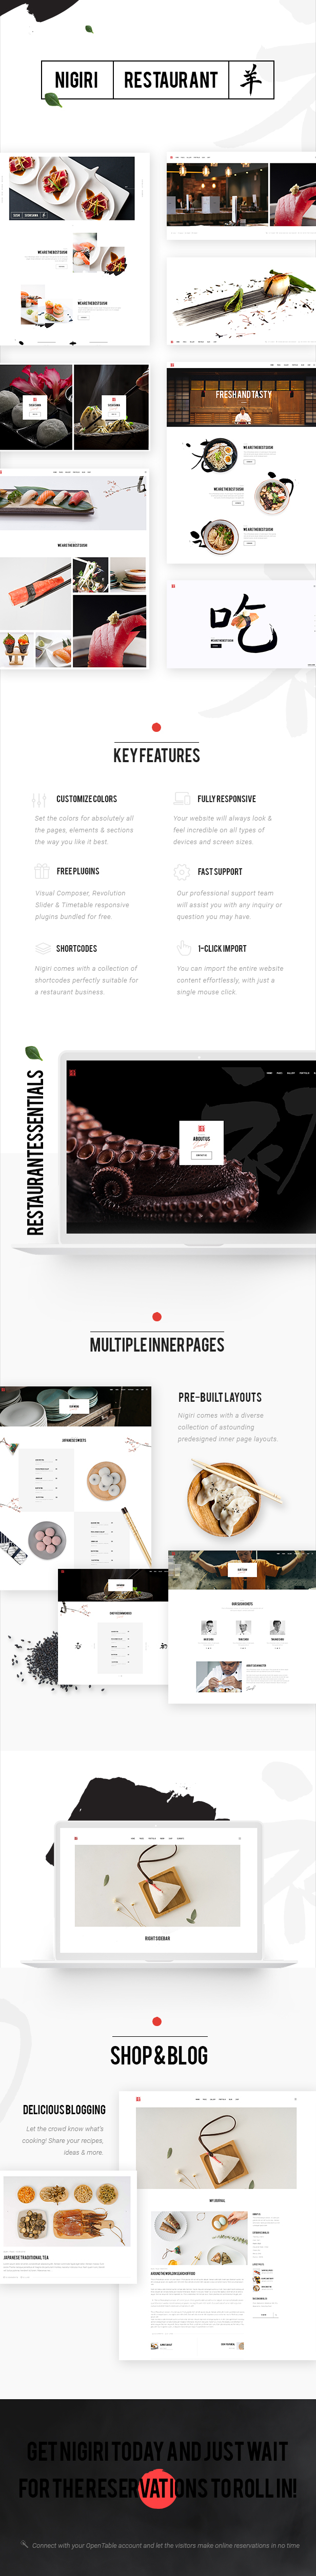 Image of a beautiful WordPress theme page for sushi restaurants.